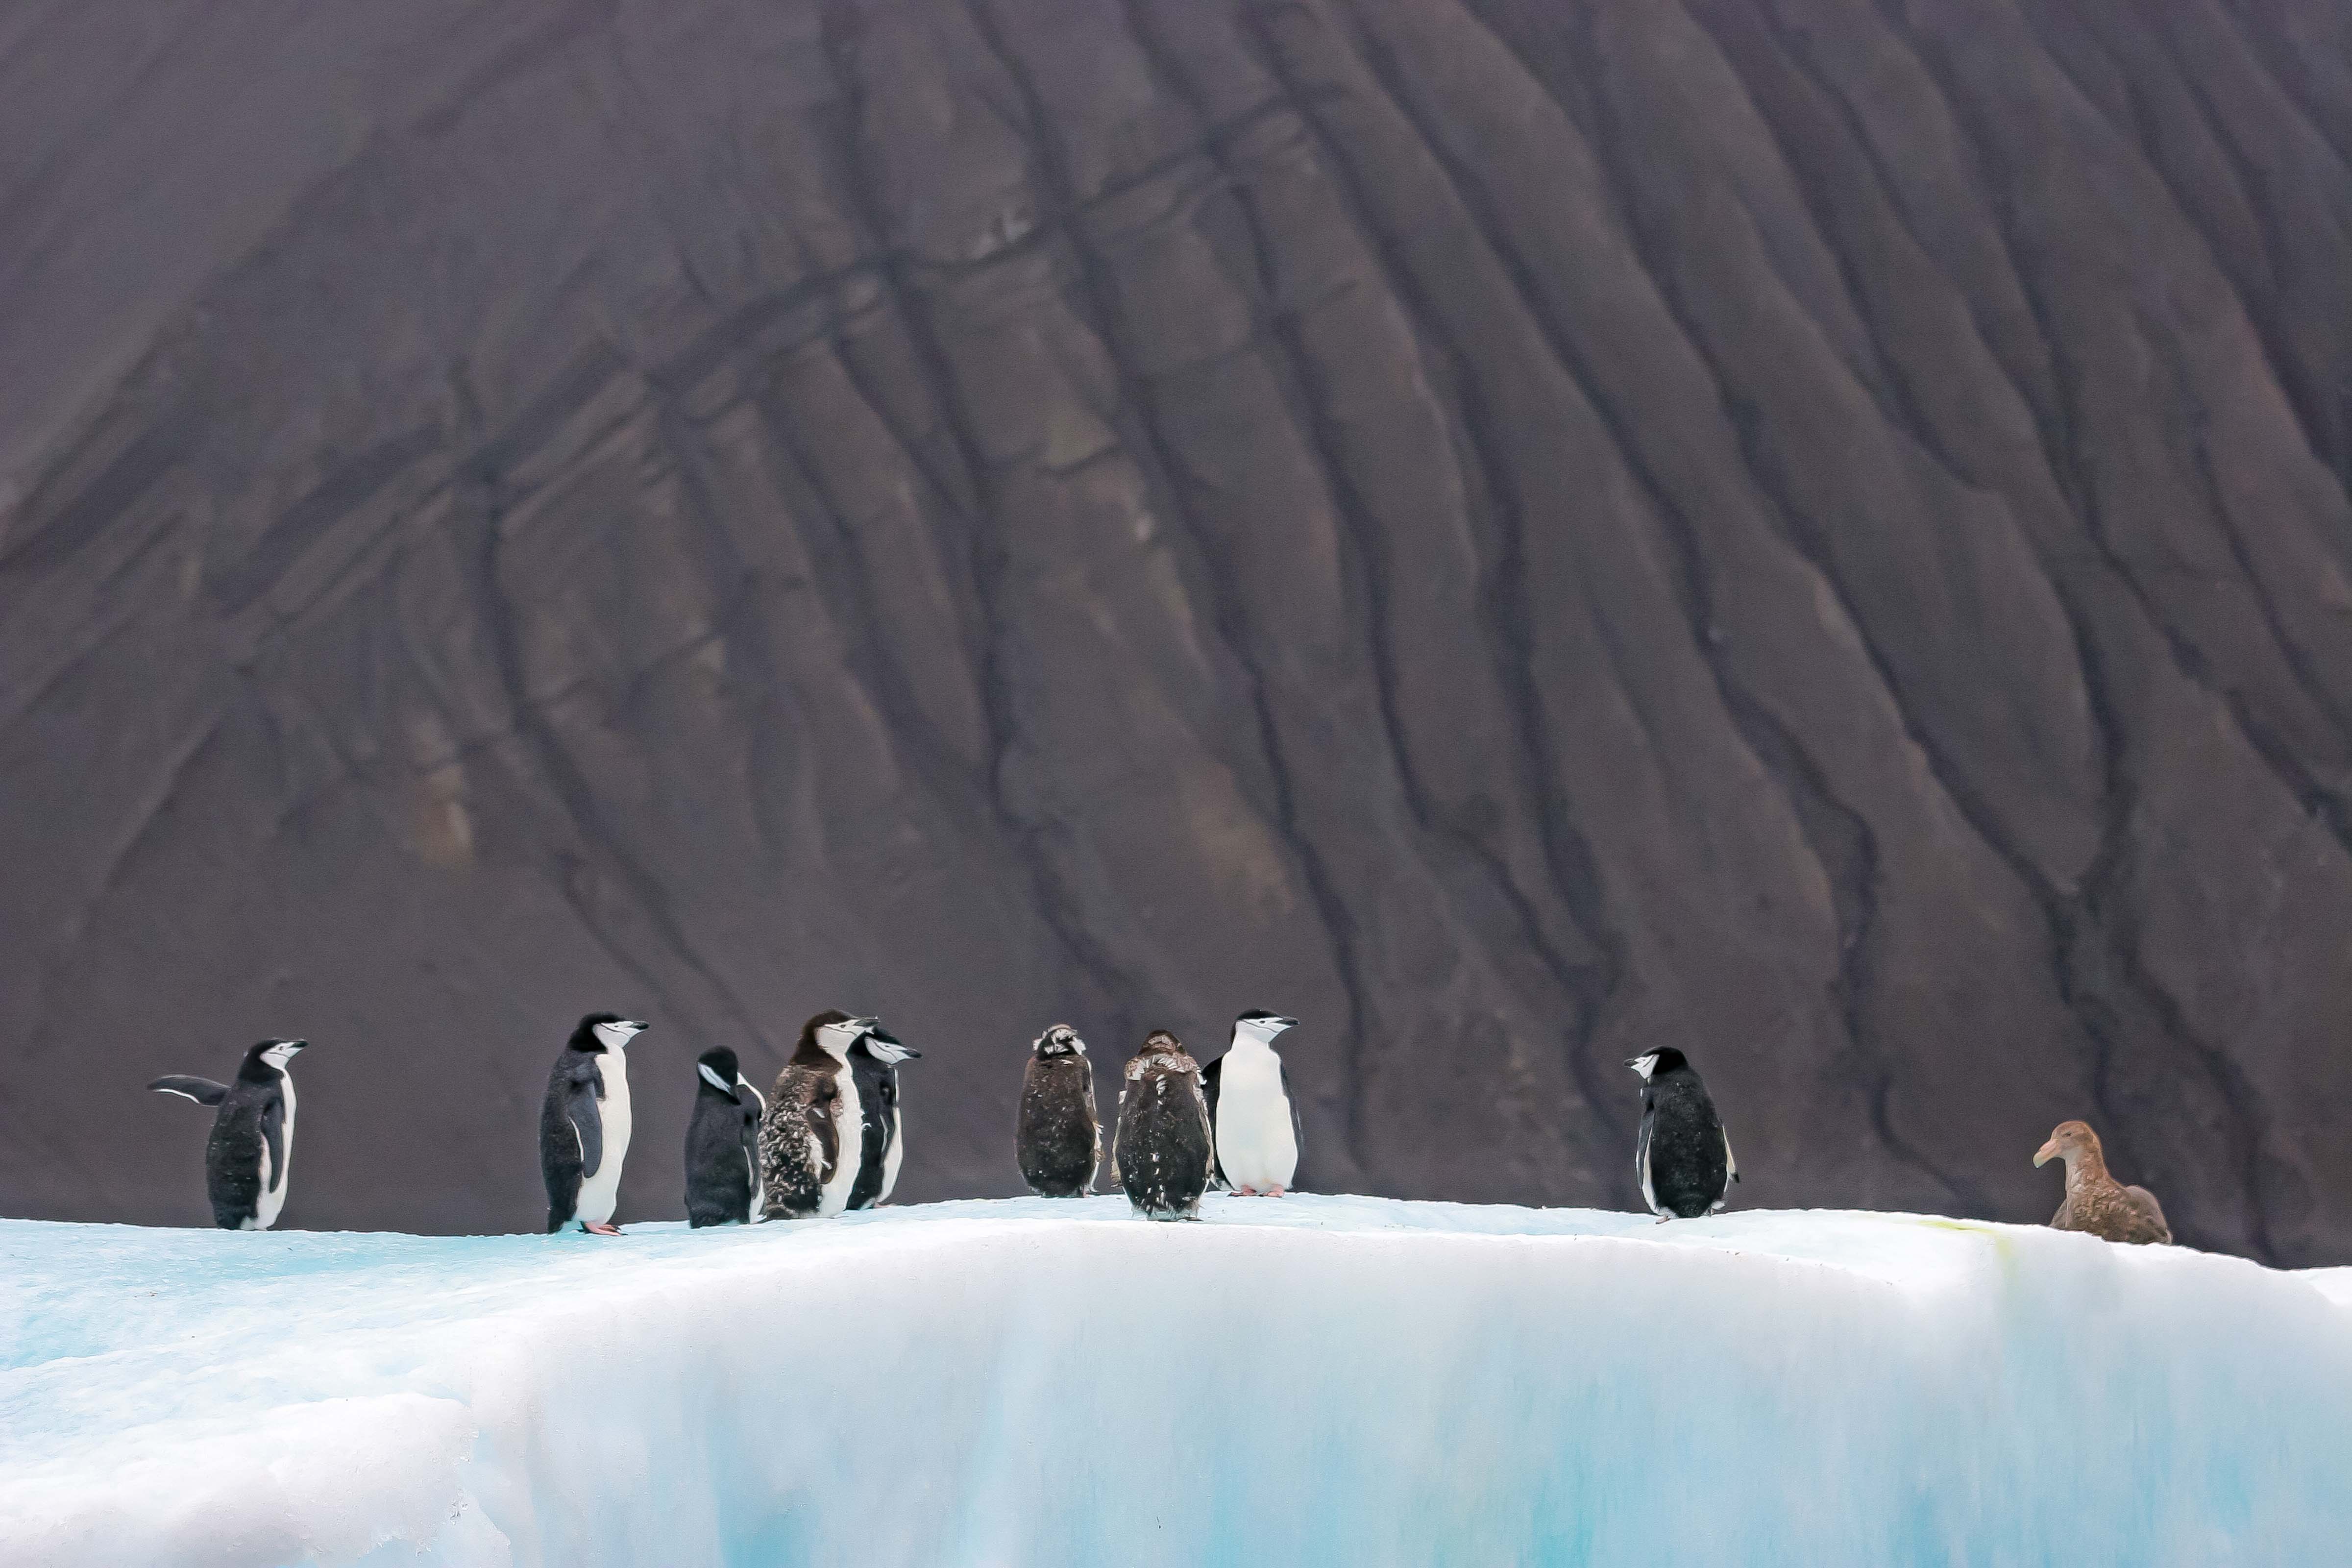 South Sandwich Is, Penguins On Iceberg With Mountain Behind, 2006